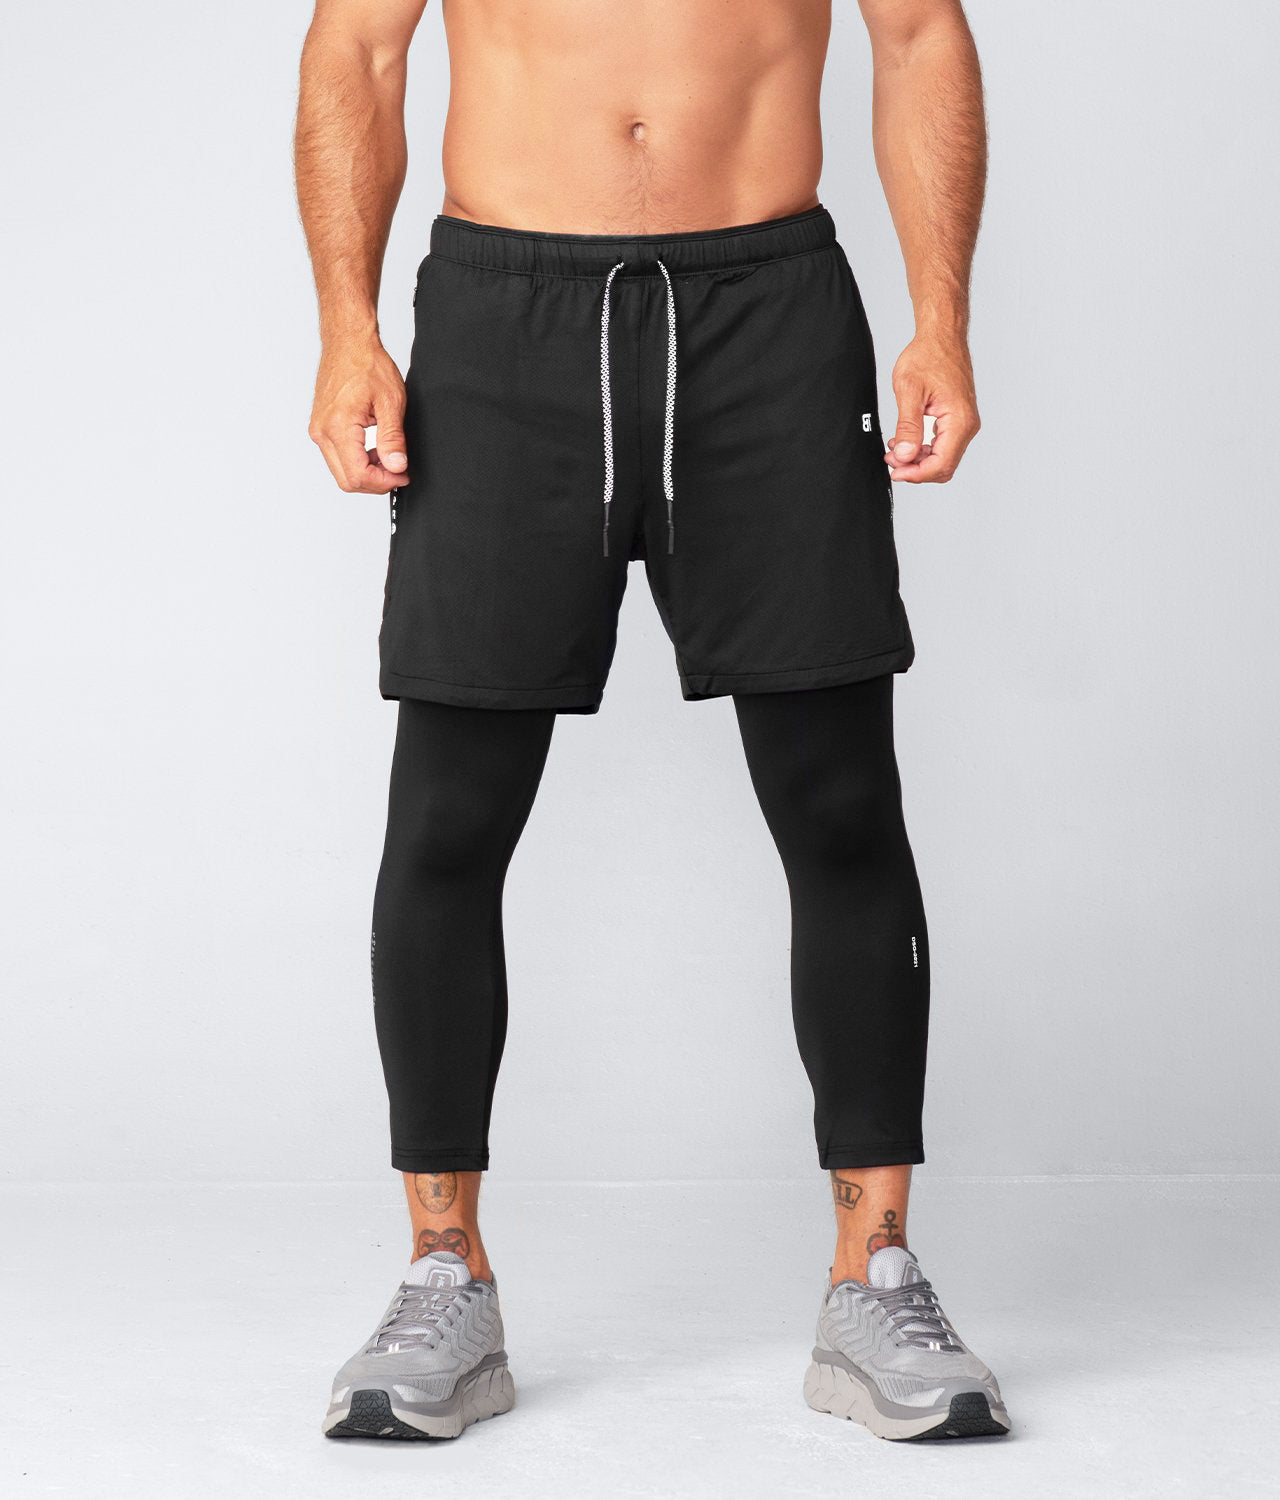 Black The Gym People Gym Shorts